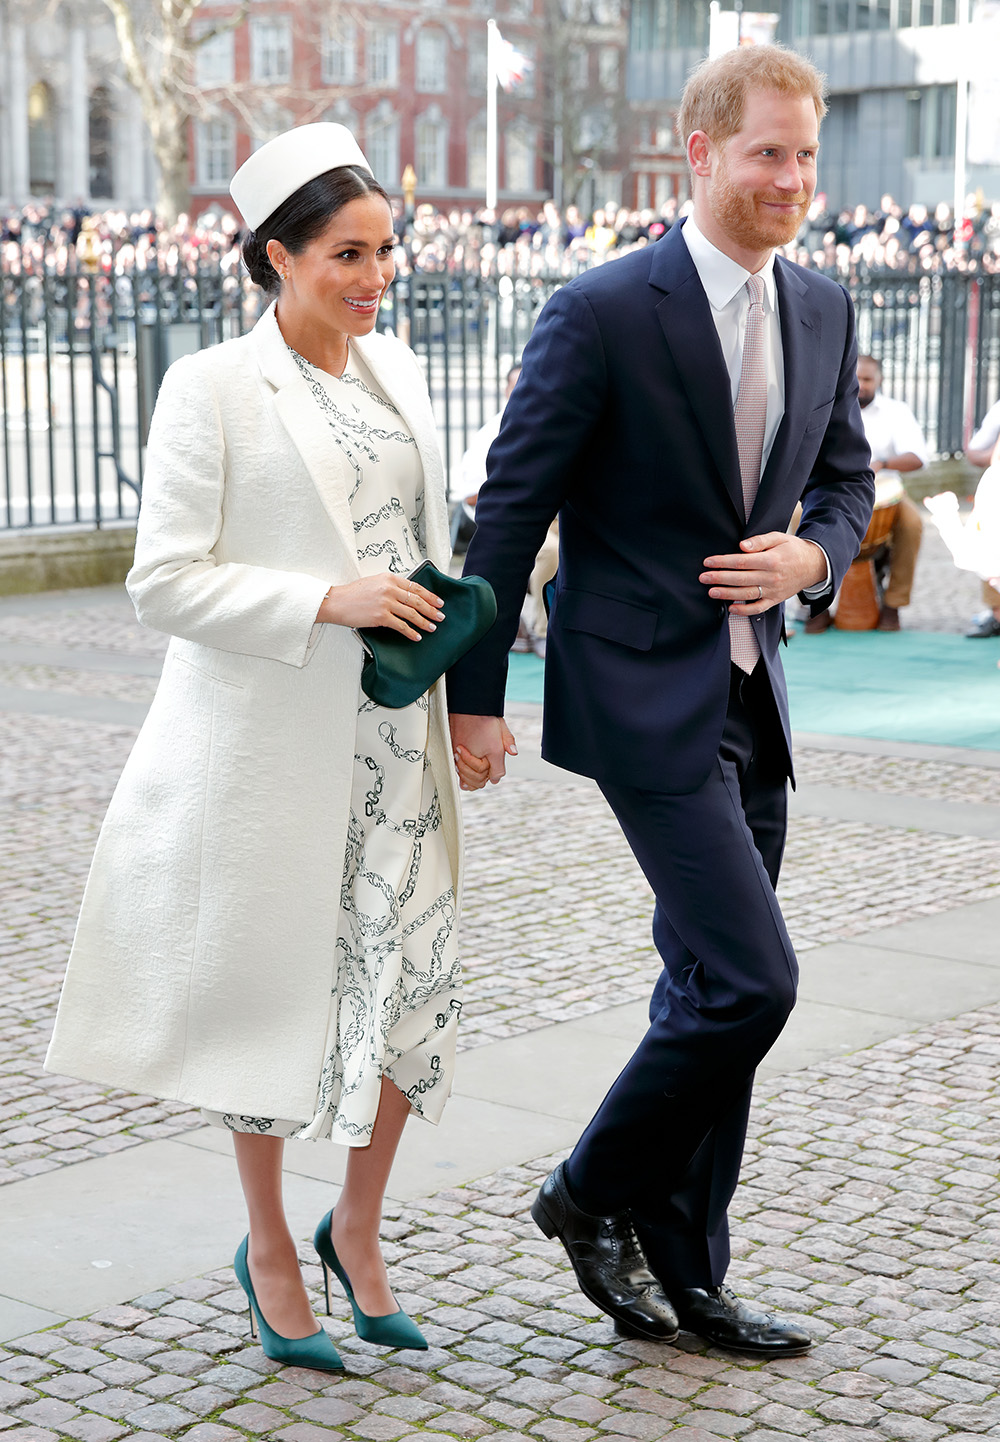 LONDON, UNITED KINGDOM - MARCH 11: (EMBARGOED FOR PUBLICATION IN UK NEWSPAPERS UNTIL 24 HOURS AFTER CREATE DATE AND TIME) Meghan, Duchess of Sussex and Prince Harry, Duke of Sussex attend the 2019 Commonwealth Day service at Westminster Abbey on March 11, 2019 in London, England. (Photo by Max Mumby/Indigo/Getty Images)